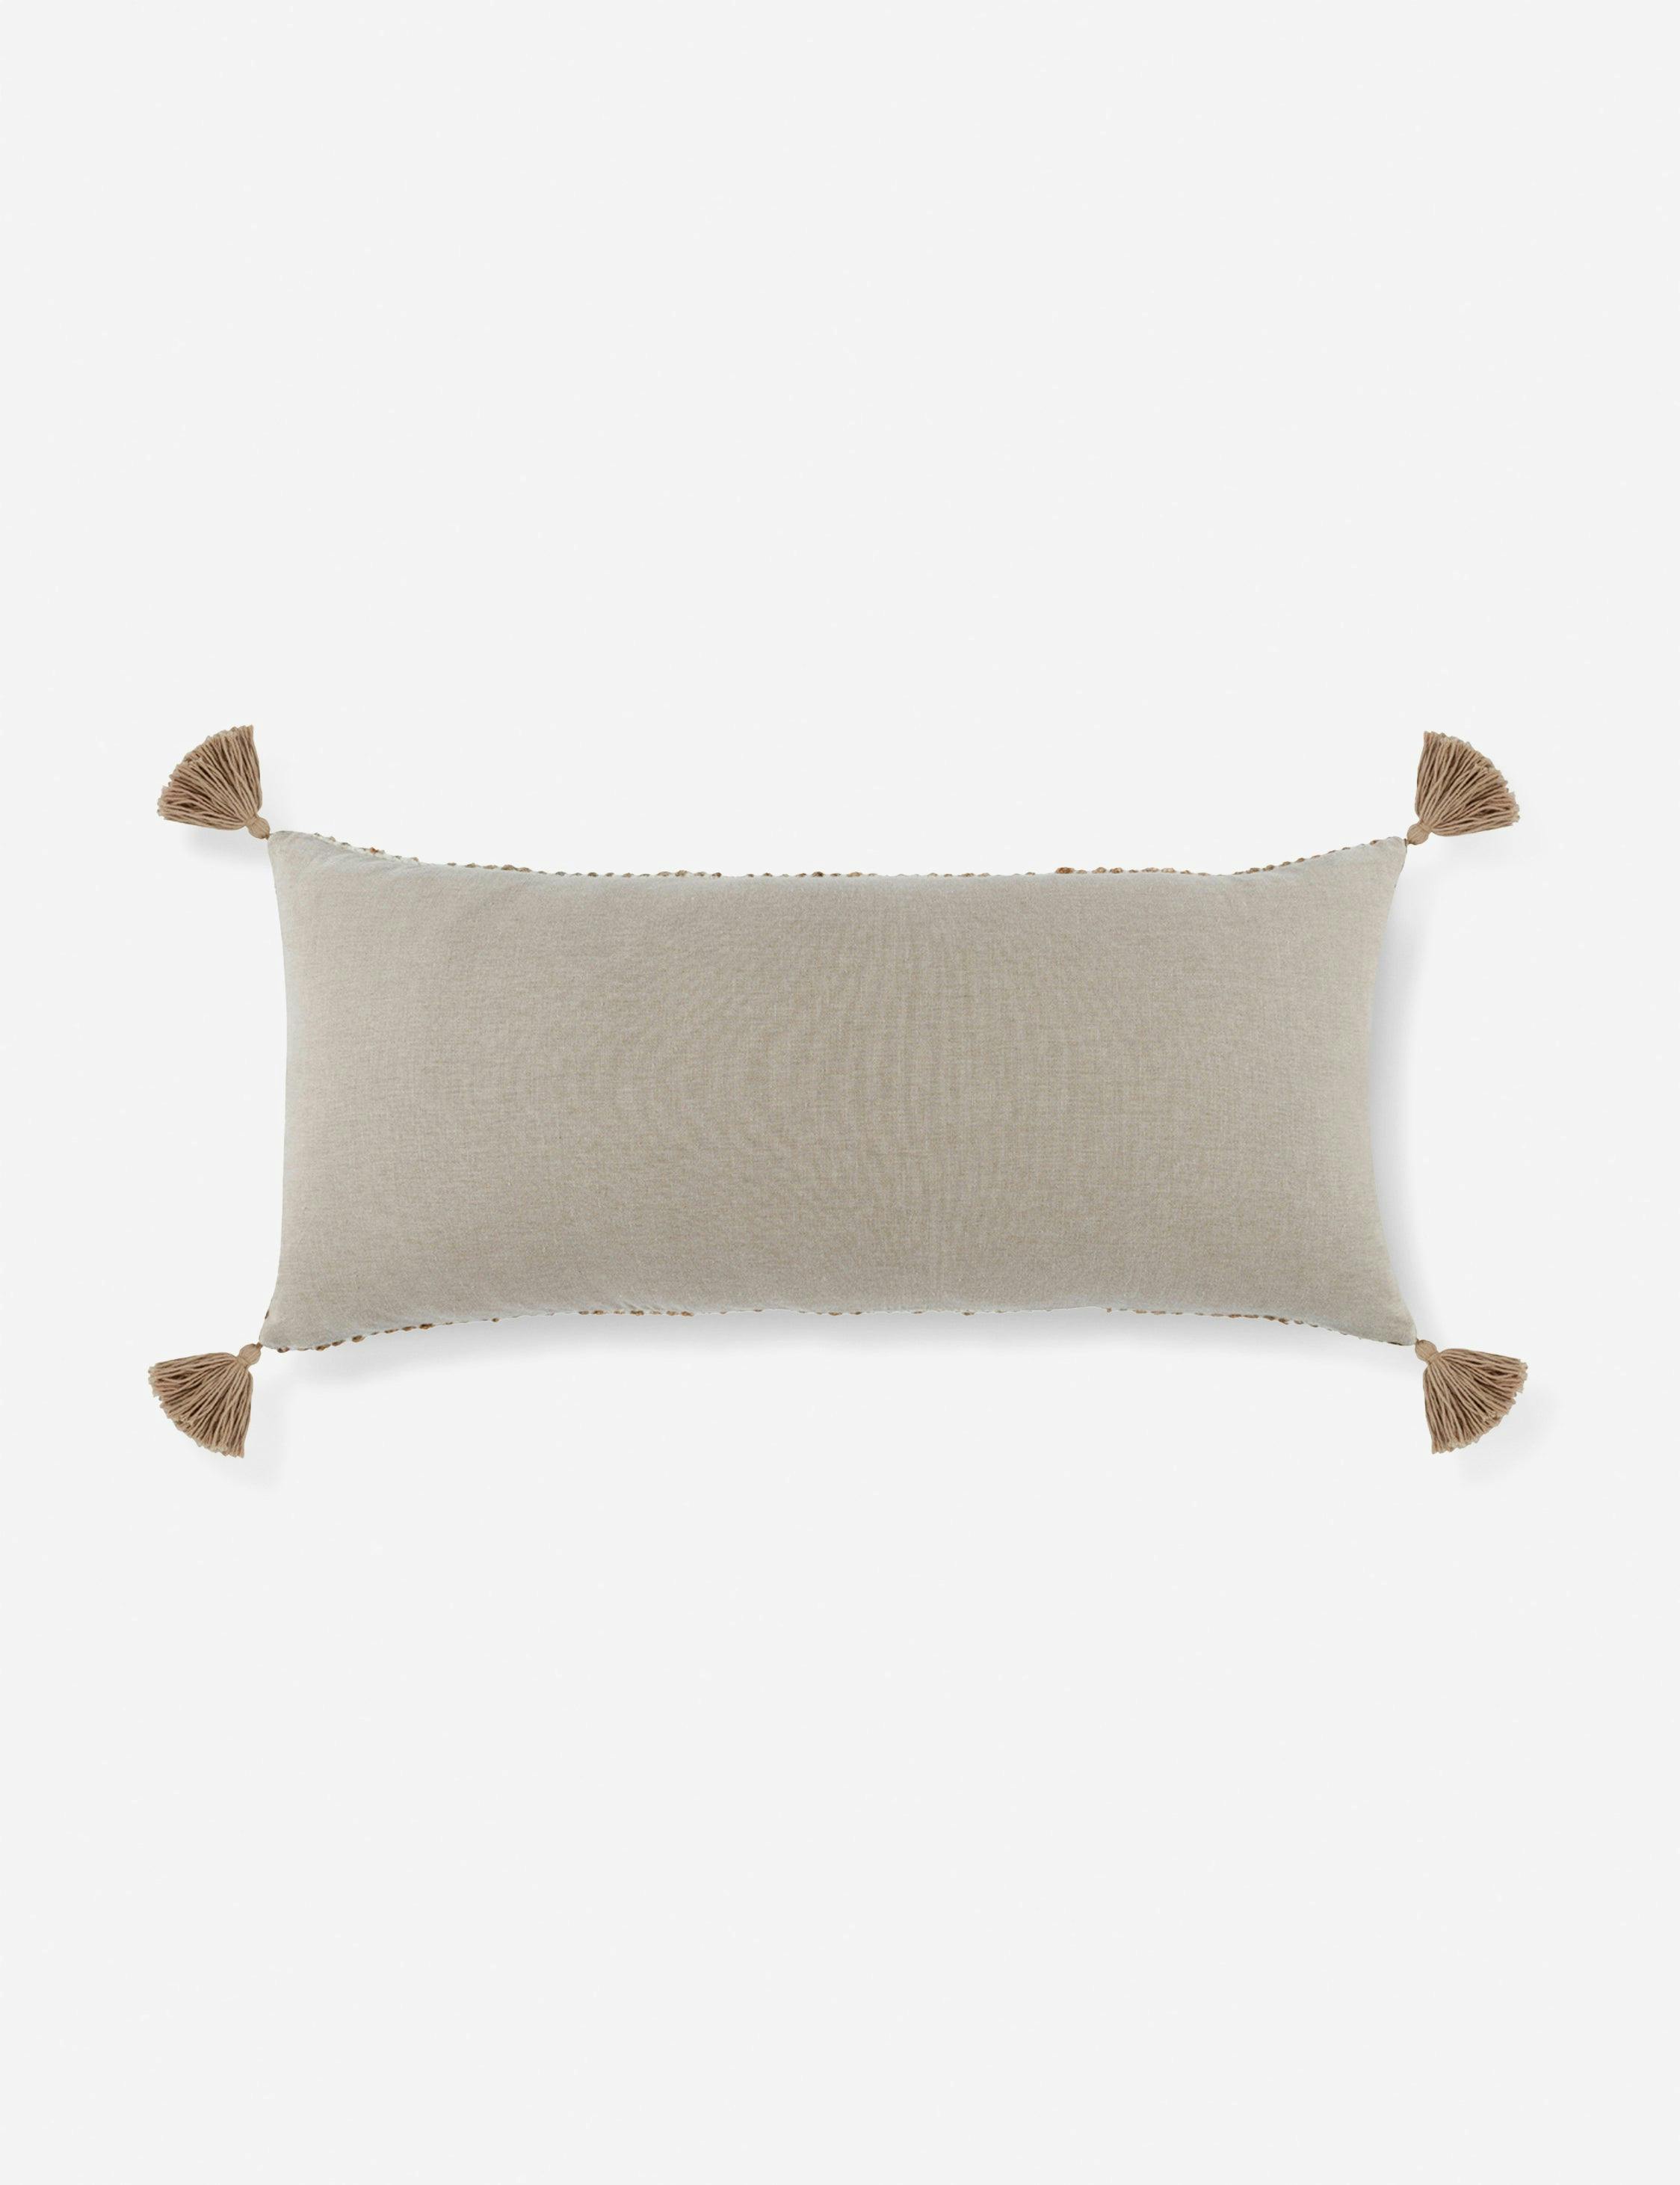 Eco-Chic Ivory & Natural Wool-Jute Blend Lumbar Pillow with Tassels